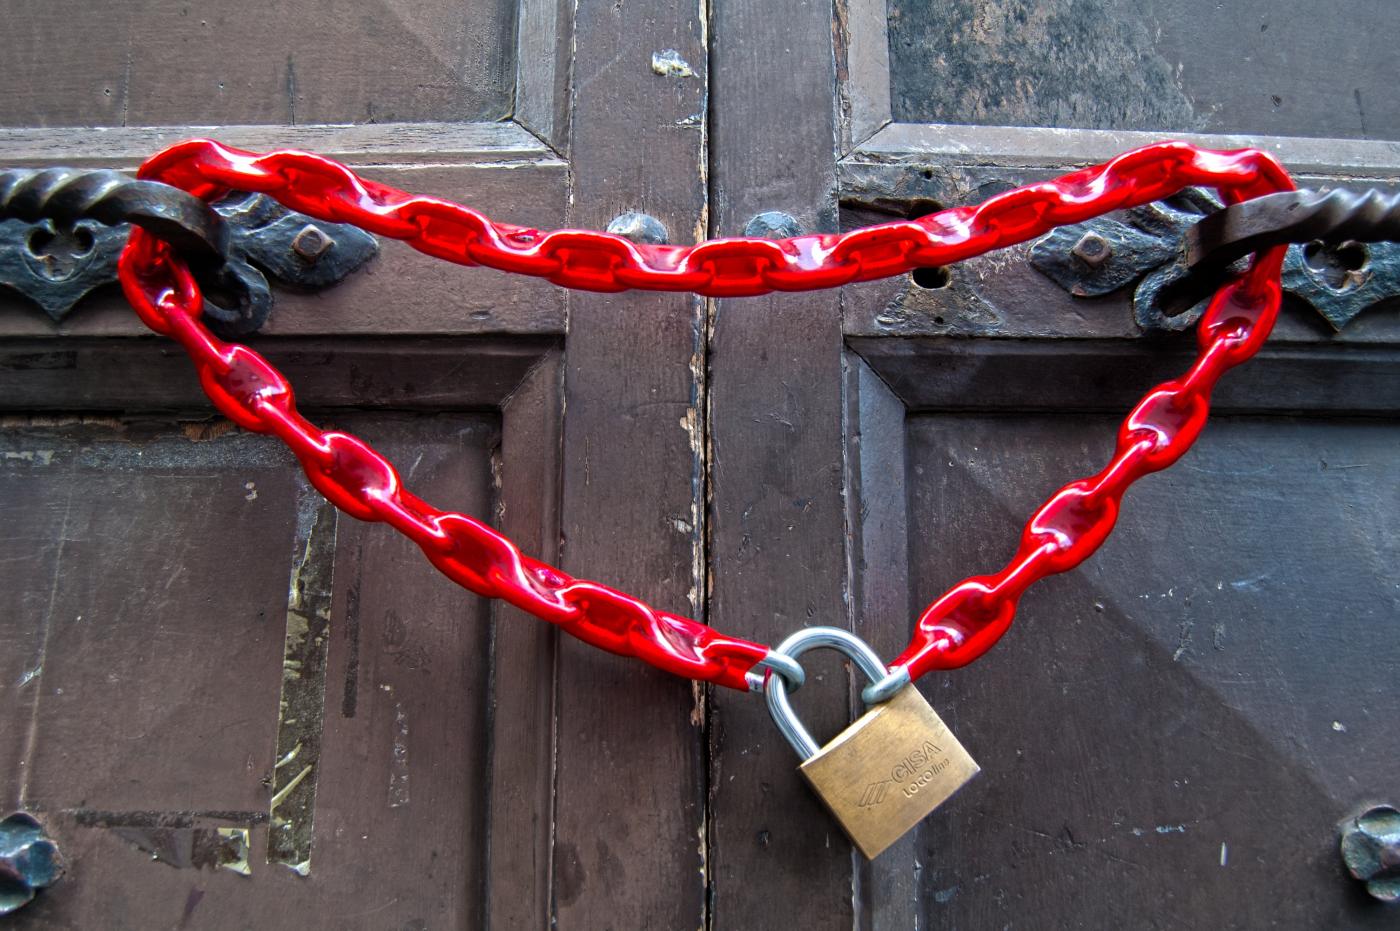 Protect Your Customer Data - Update SSL/TLS Security Protocols